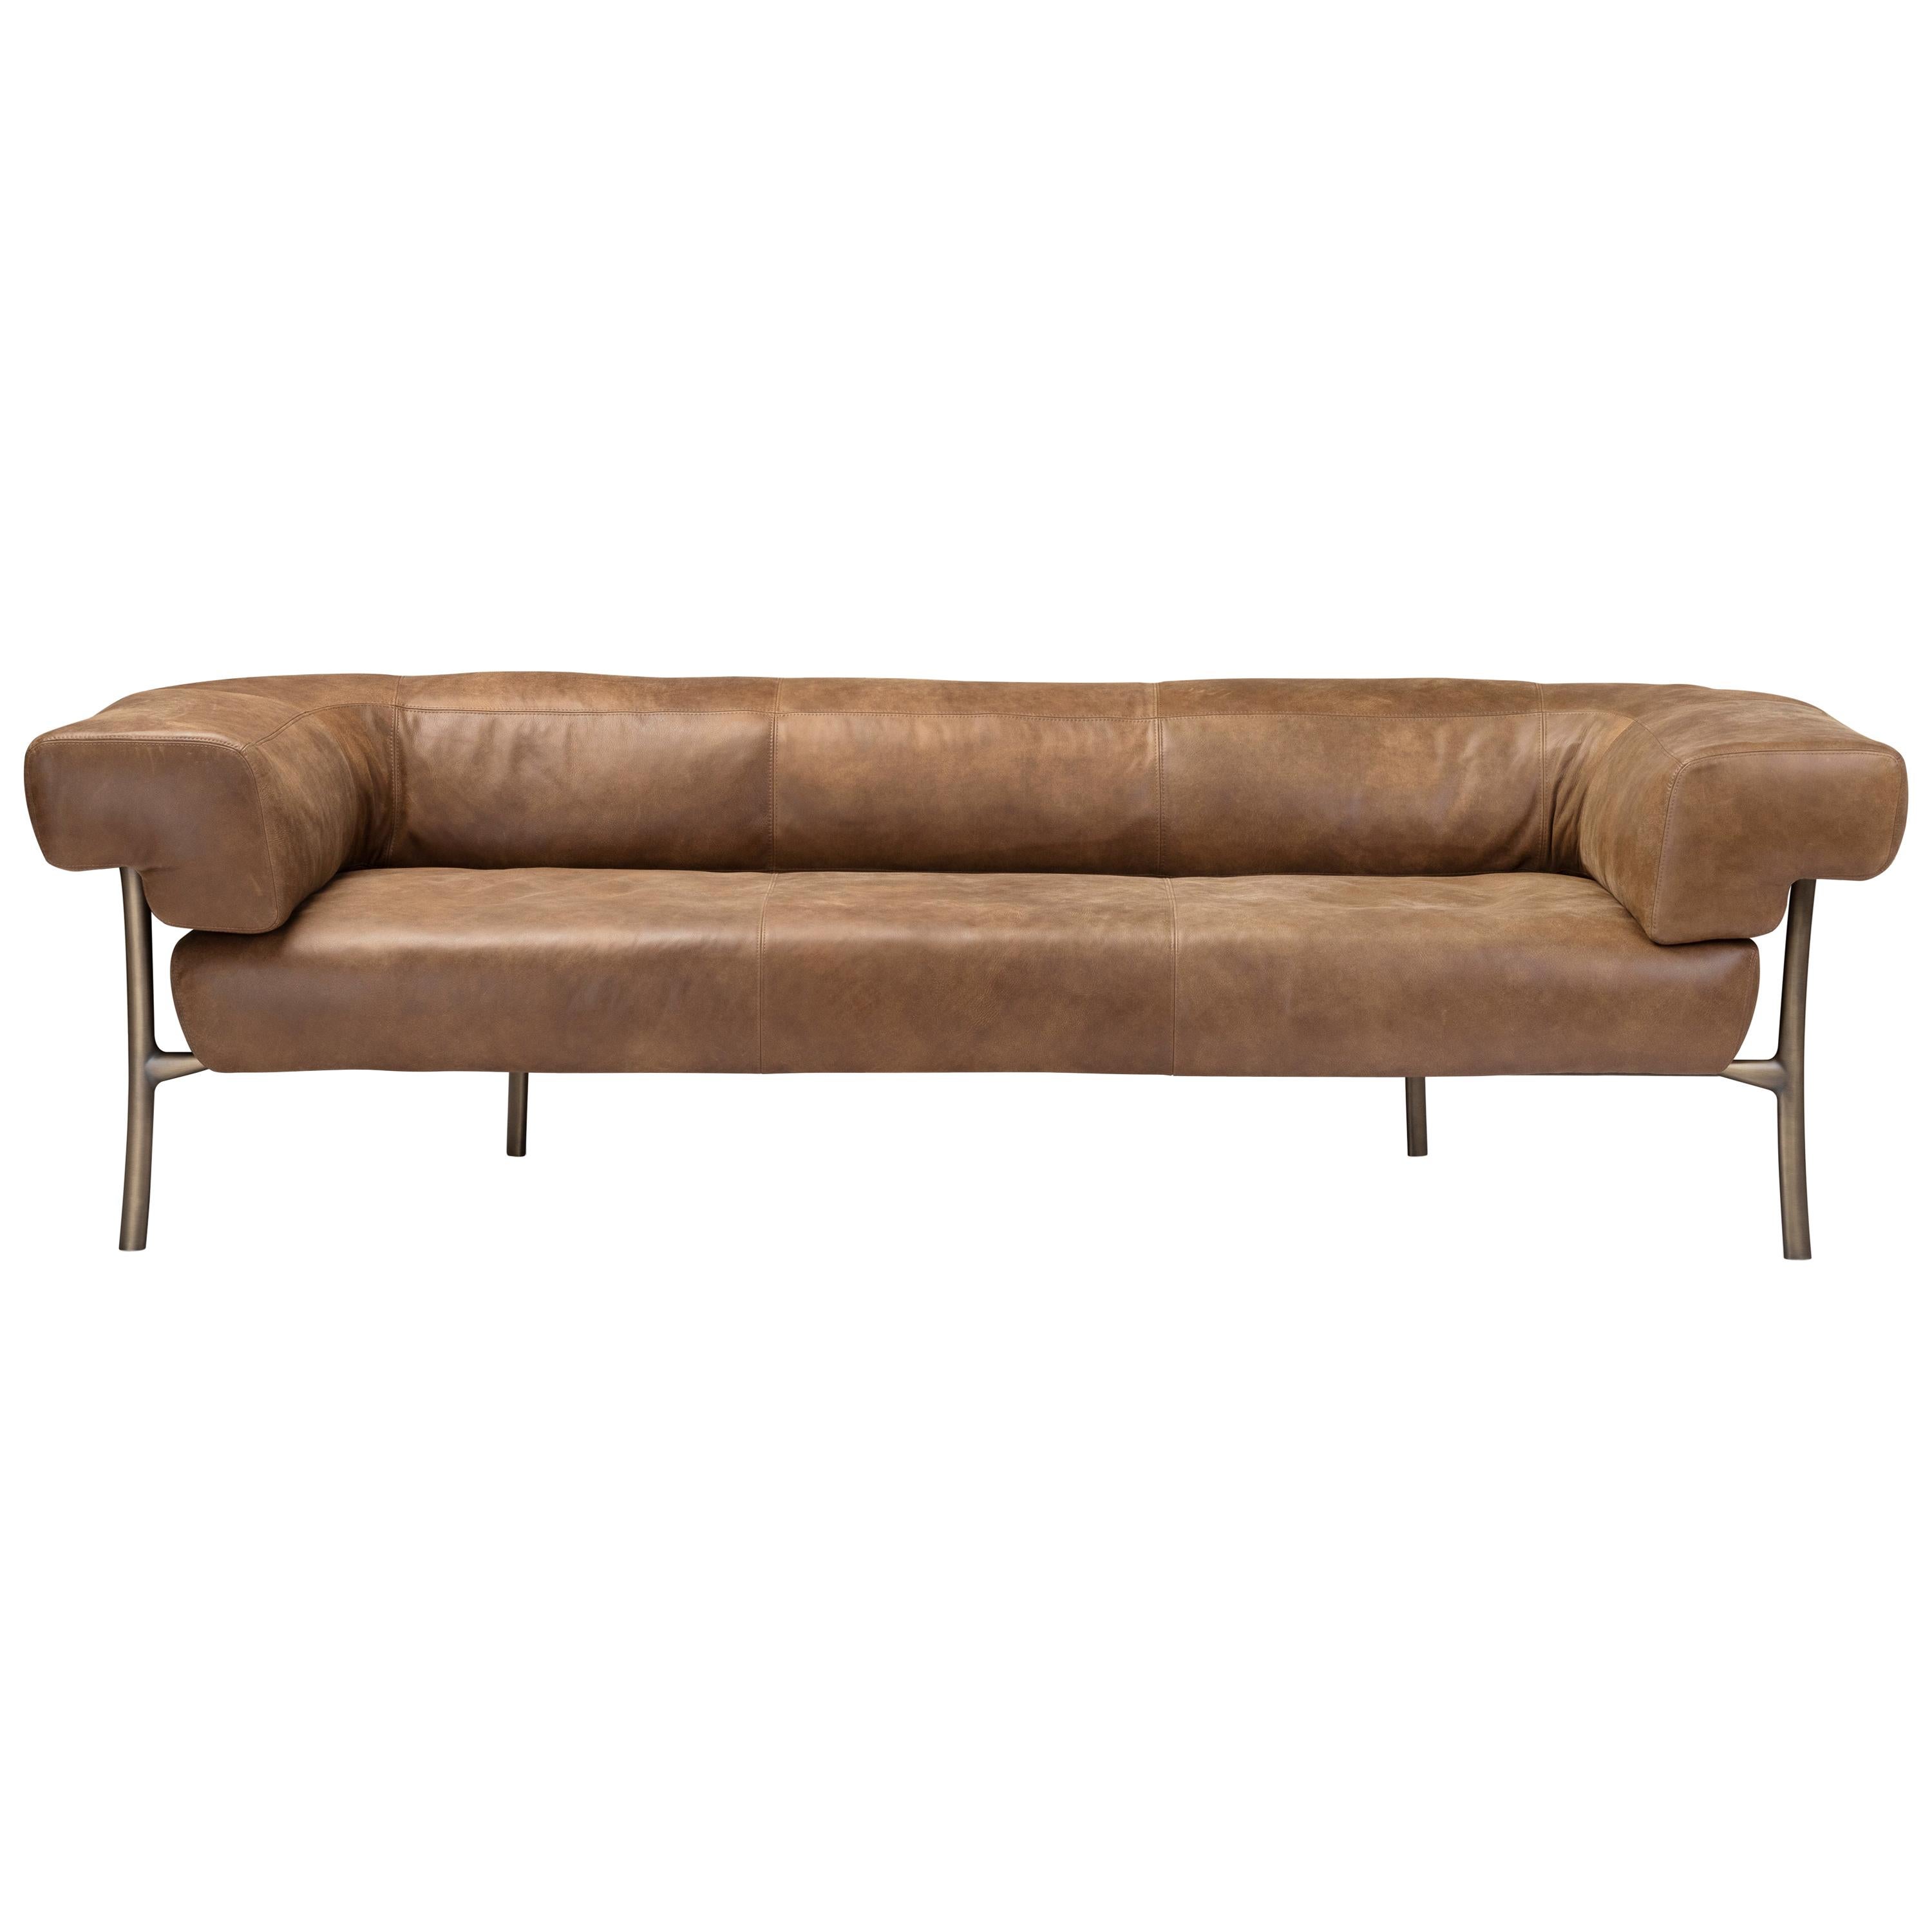 Katana 2 Seater Sofa in Choclate Forest Leather with Brown Burnished Brass Legs For Sale